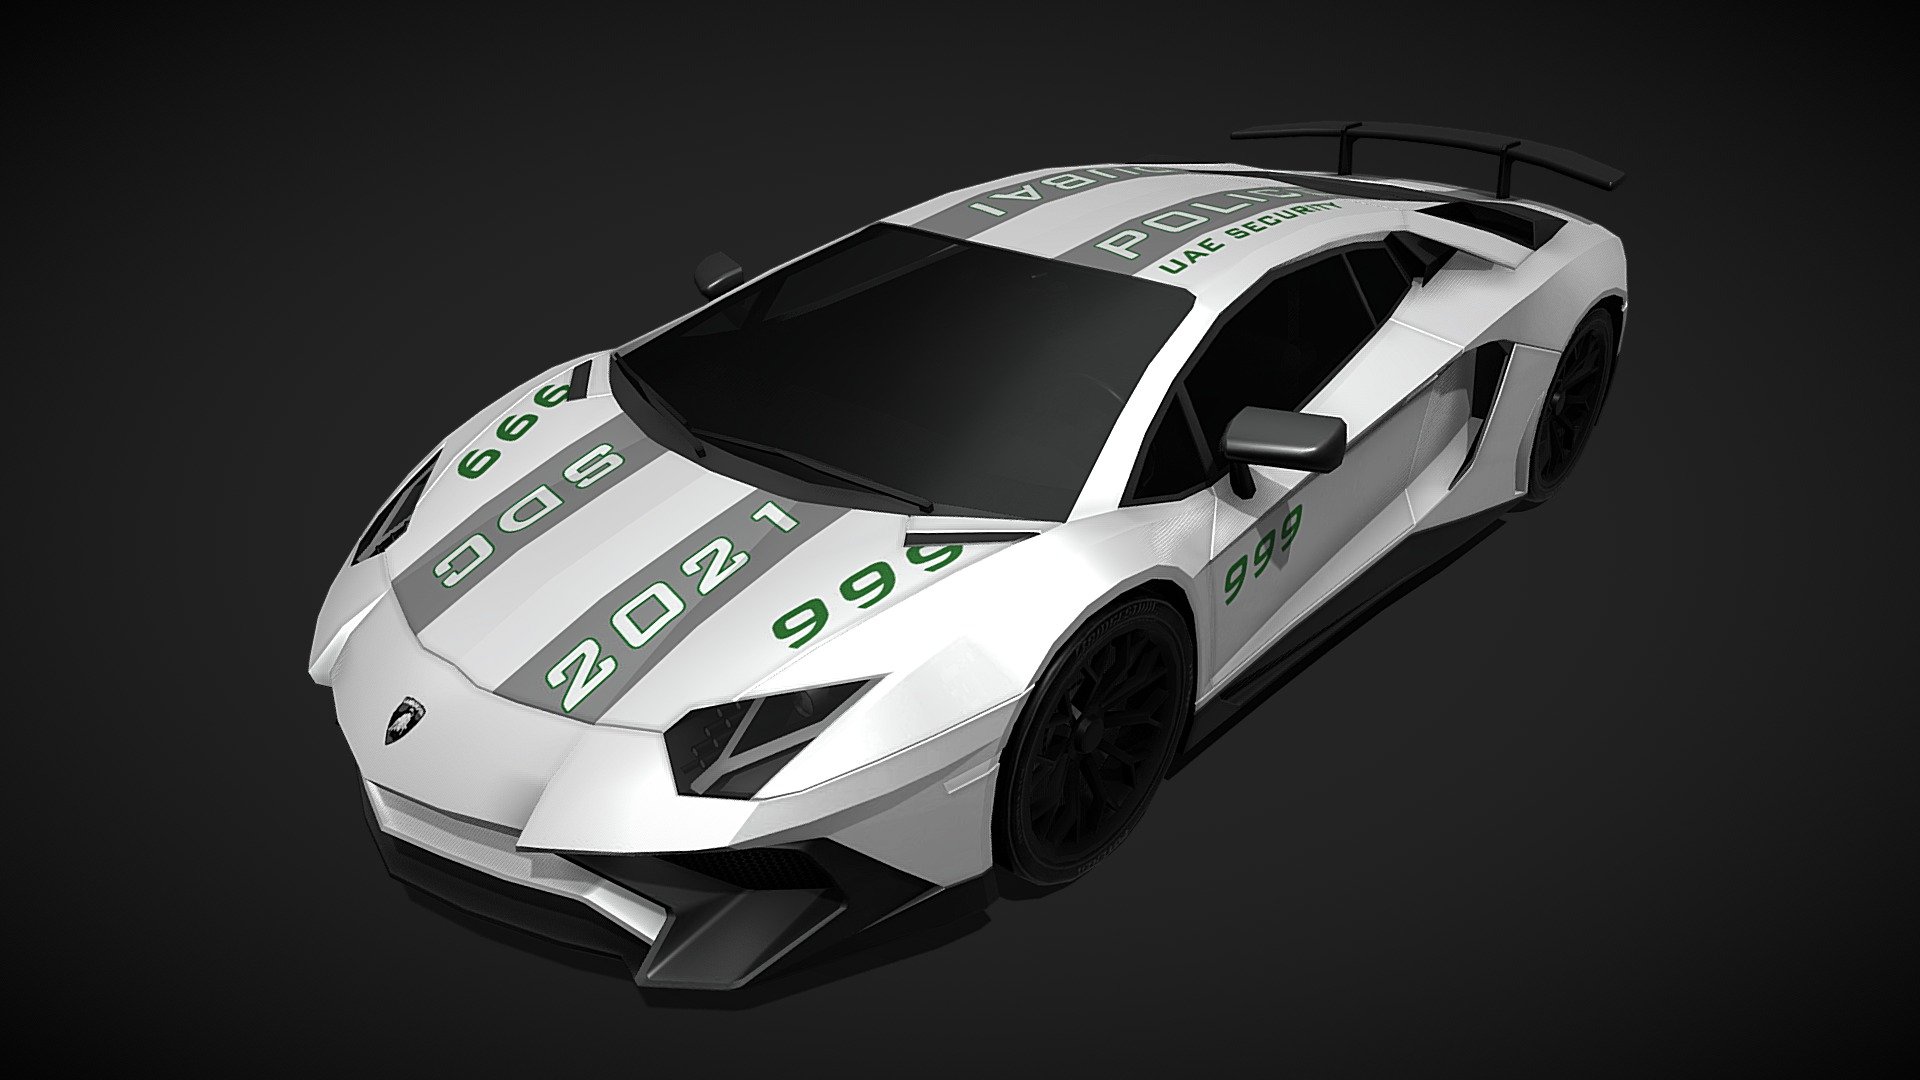 In Dubai, you'll see Lamborghinis on every street corner (especially Huracans and Urus), and plenty of other supercars, so imagine yourself driving a Lambo with 750 horsepower behind your back which propels you from 0 at 100 in 2.8… Impossible to drive normally, but don't be smart, the Dubai police have what it takes to catch you, you will get your fine, like everyone else!

Base by Arial Digital - Texture Photoshop 3d model